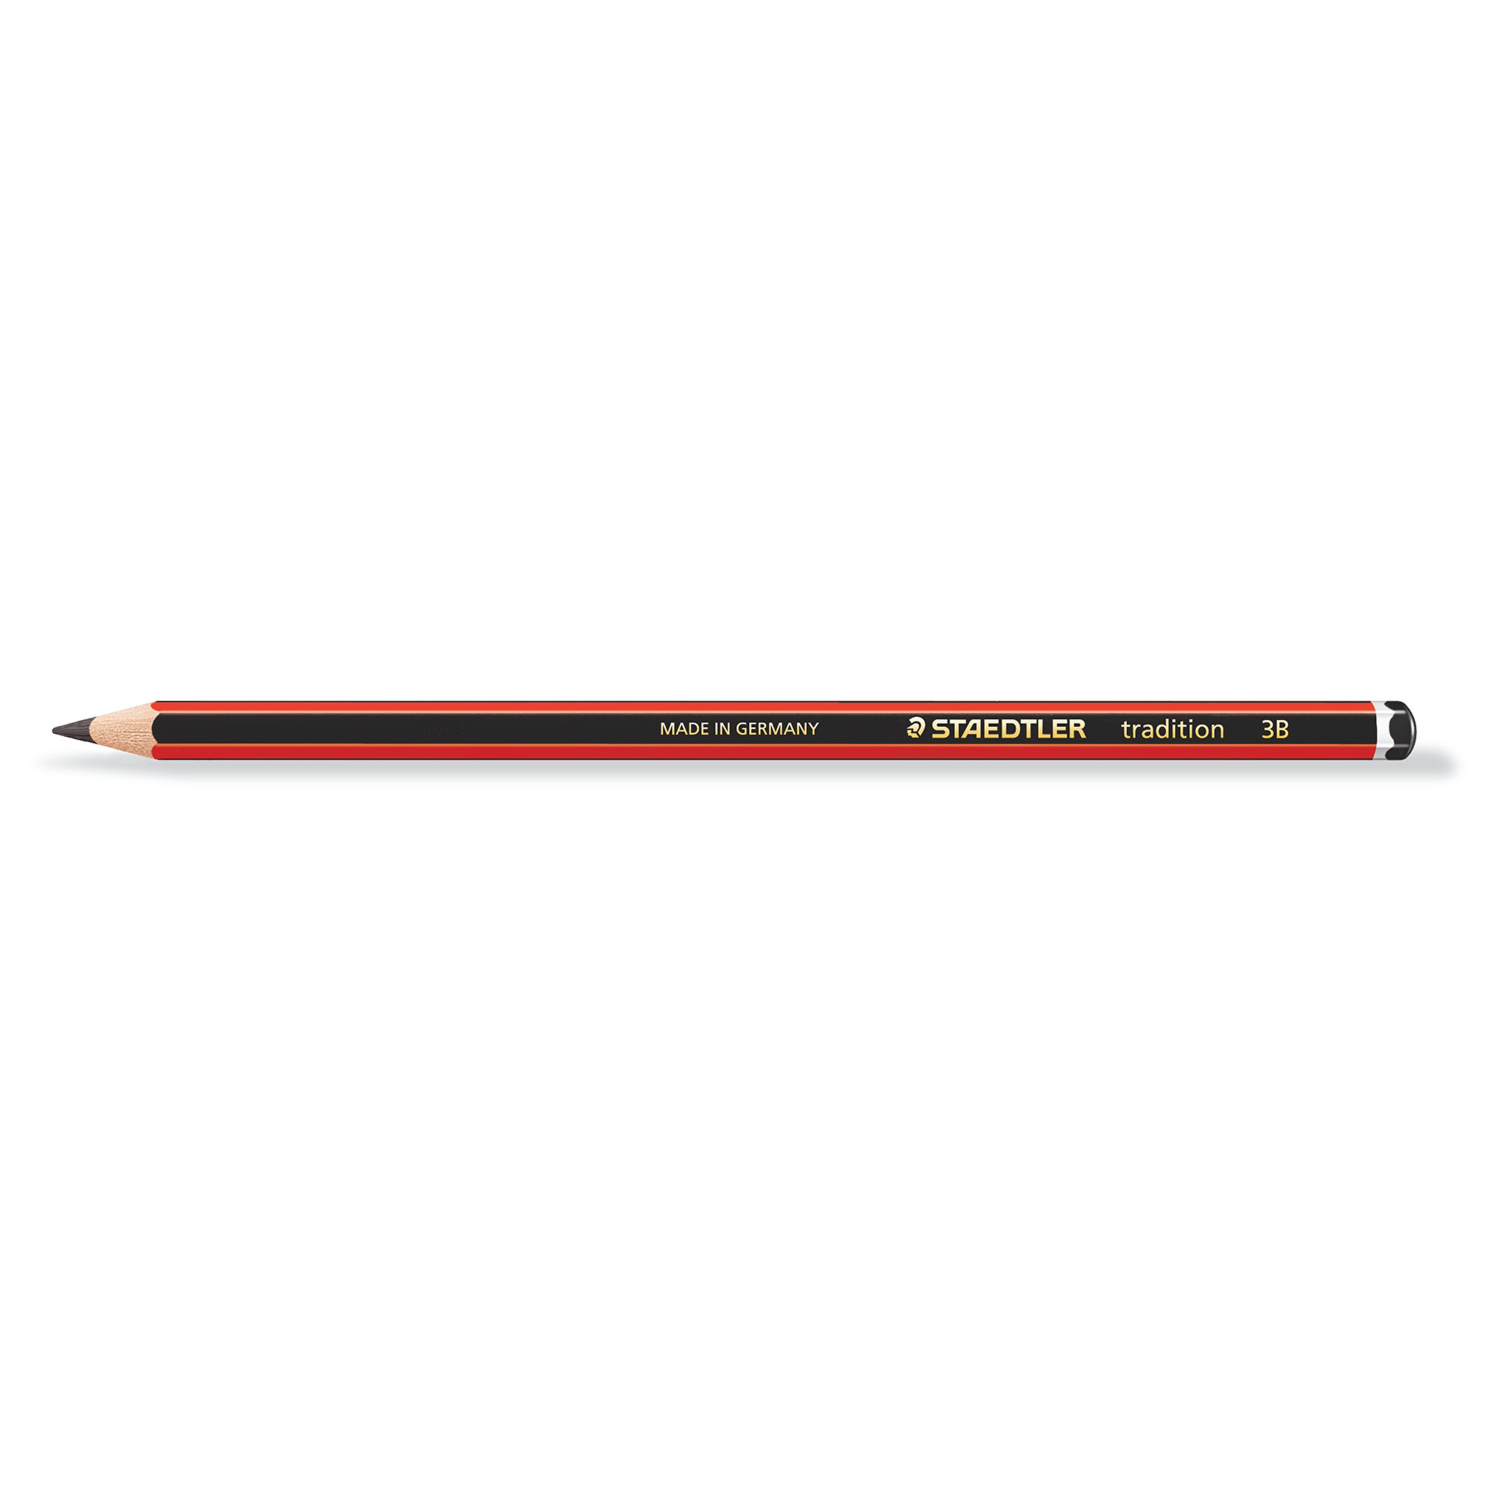 Staedtler Traditional Pencil - 3B Image